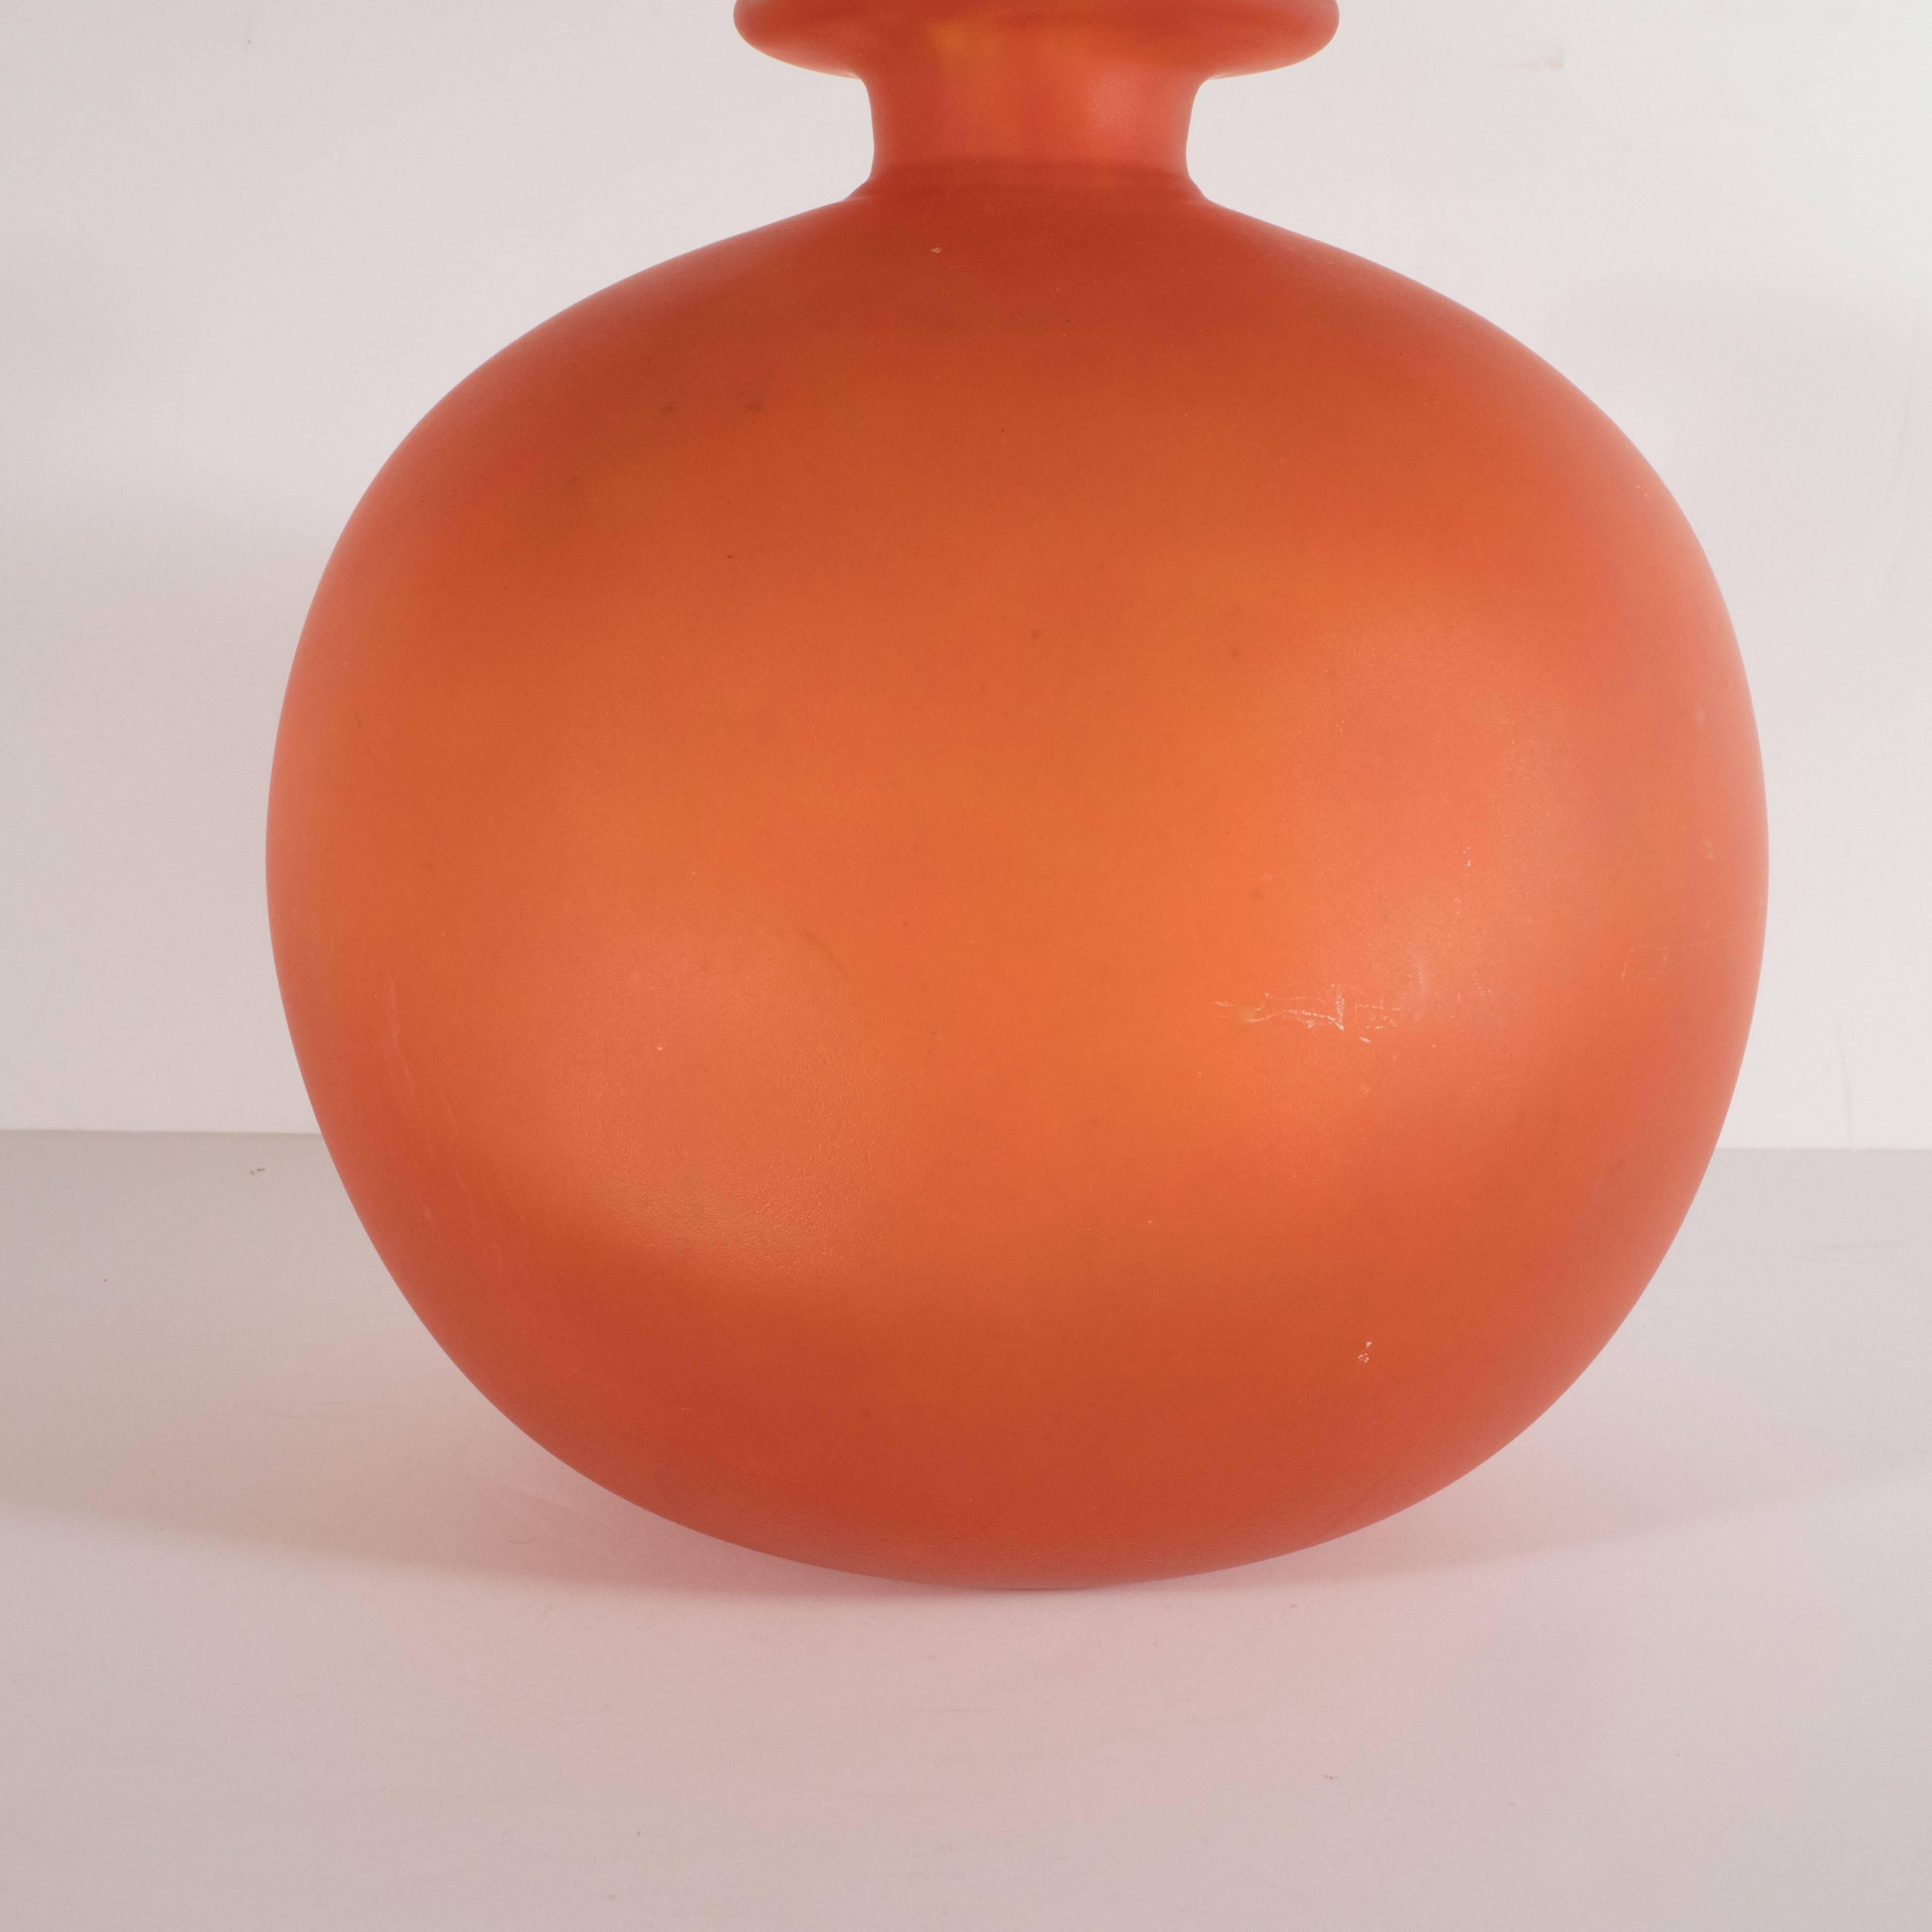 This beautiful Art Deco vase was handblown by Charles Schneider one of the most illustrious glass blowers of the period in France, circa 1930. It features an orbital body with a cylindrical neck that expands outwards to a circular bobeches style